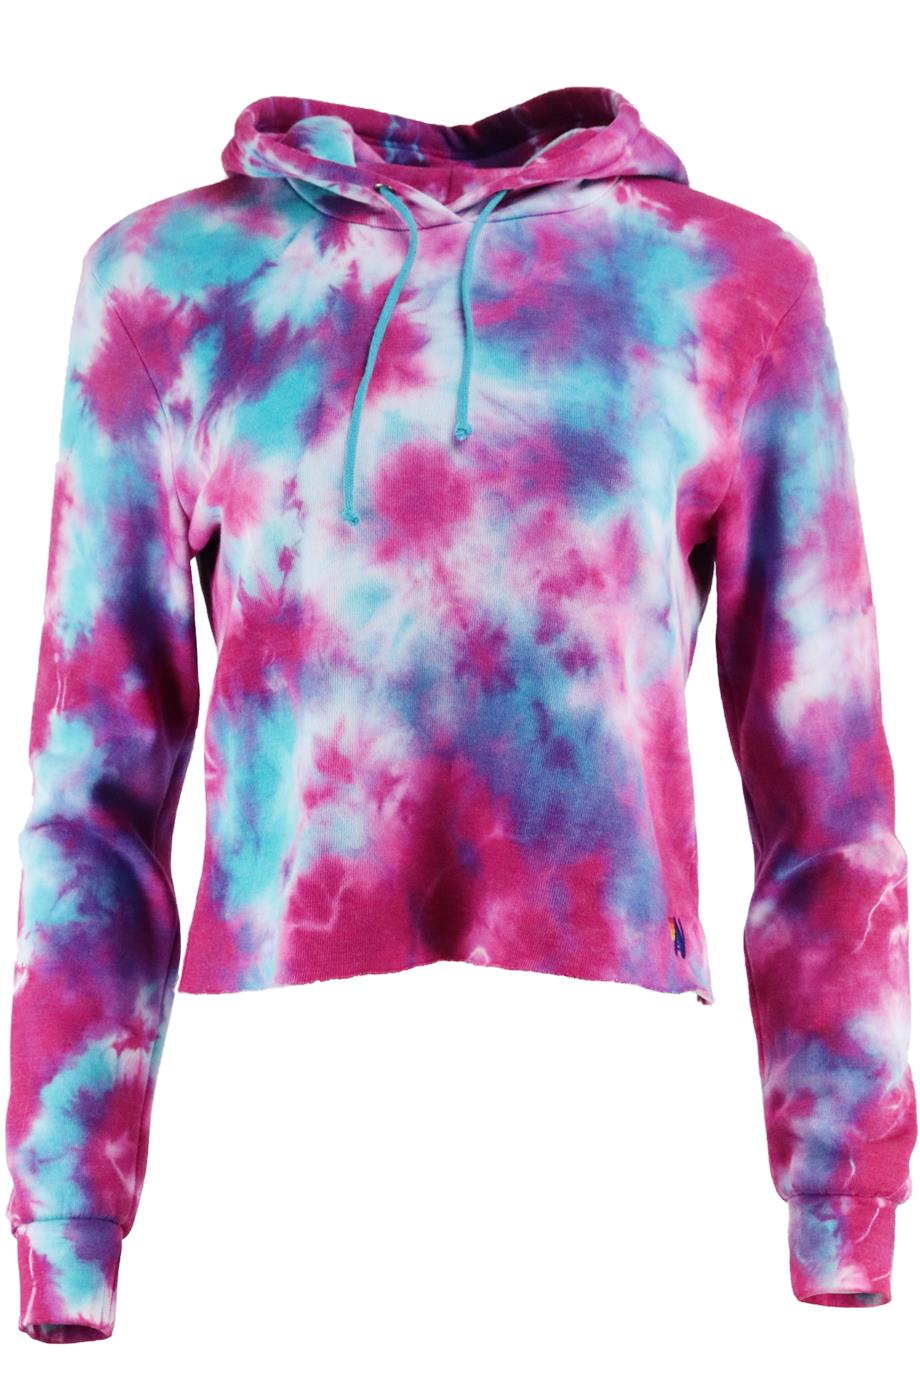 AVIATOR NATION TIE DYED COTTON JERSEY HOODIE SMALL